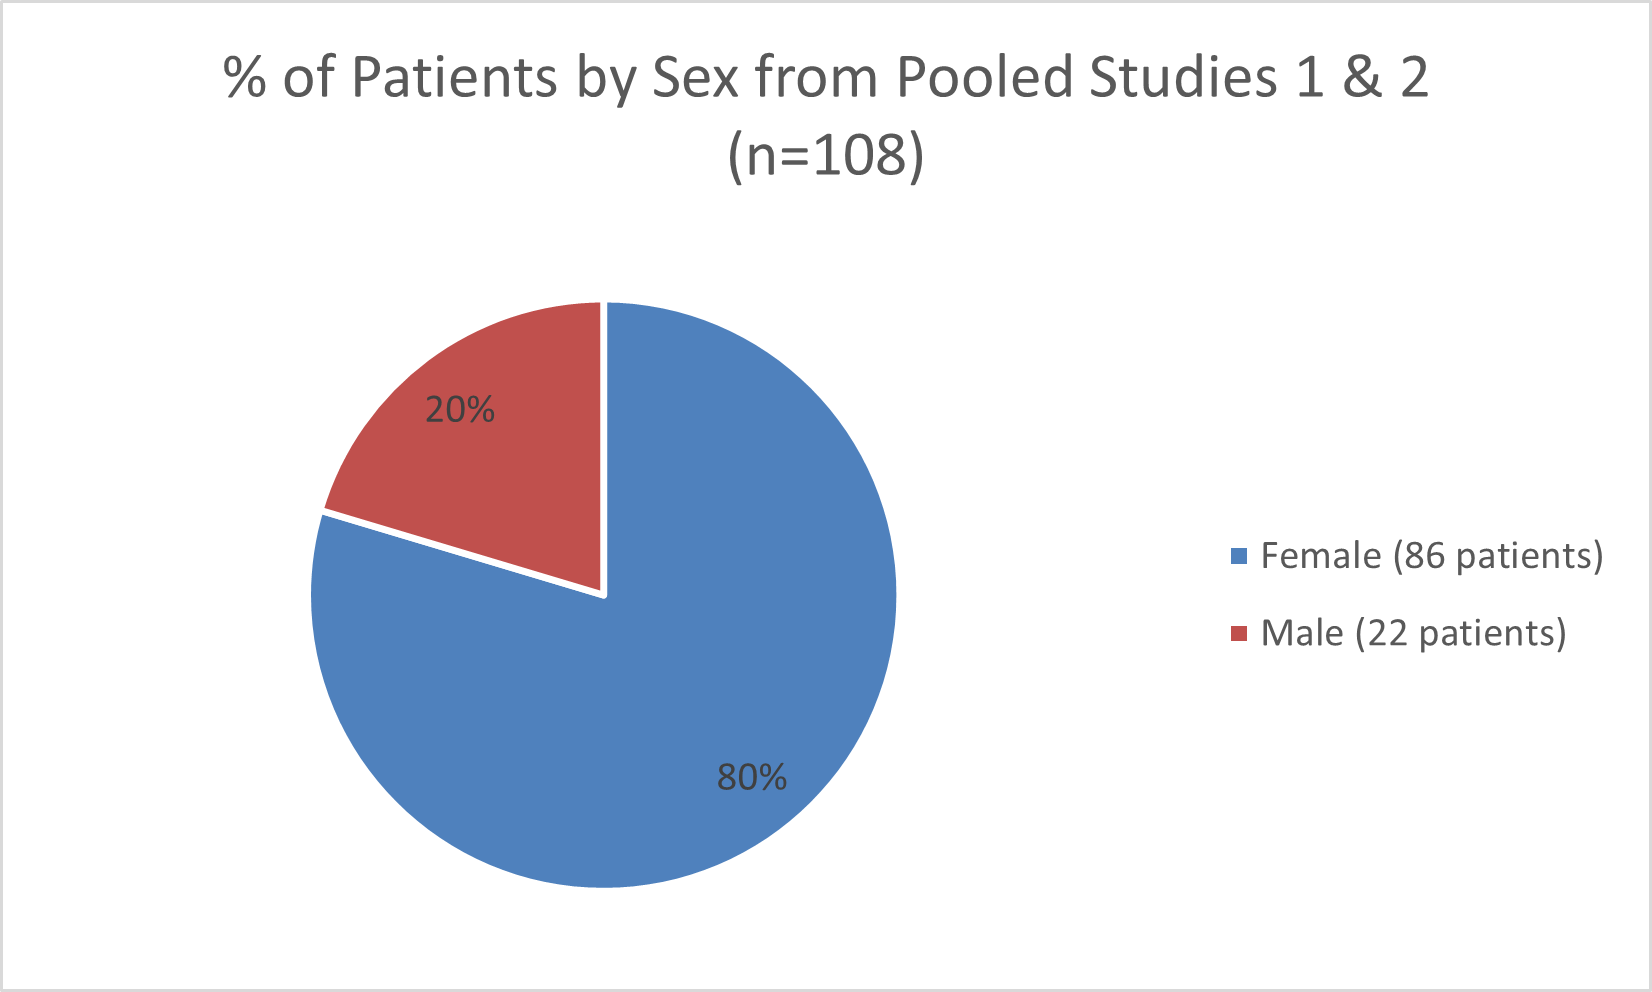 Pie chart summarizing how many males and females were in the clinical trial used to evaluate the safety. In total, 22 (20%) males and 86 (80%) females participated in the clinical trial.